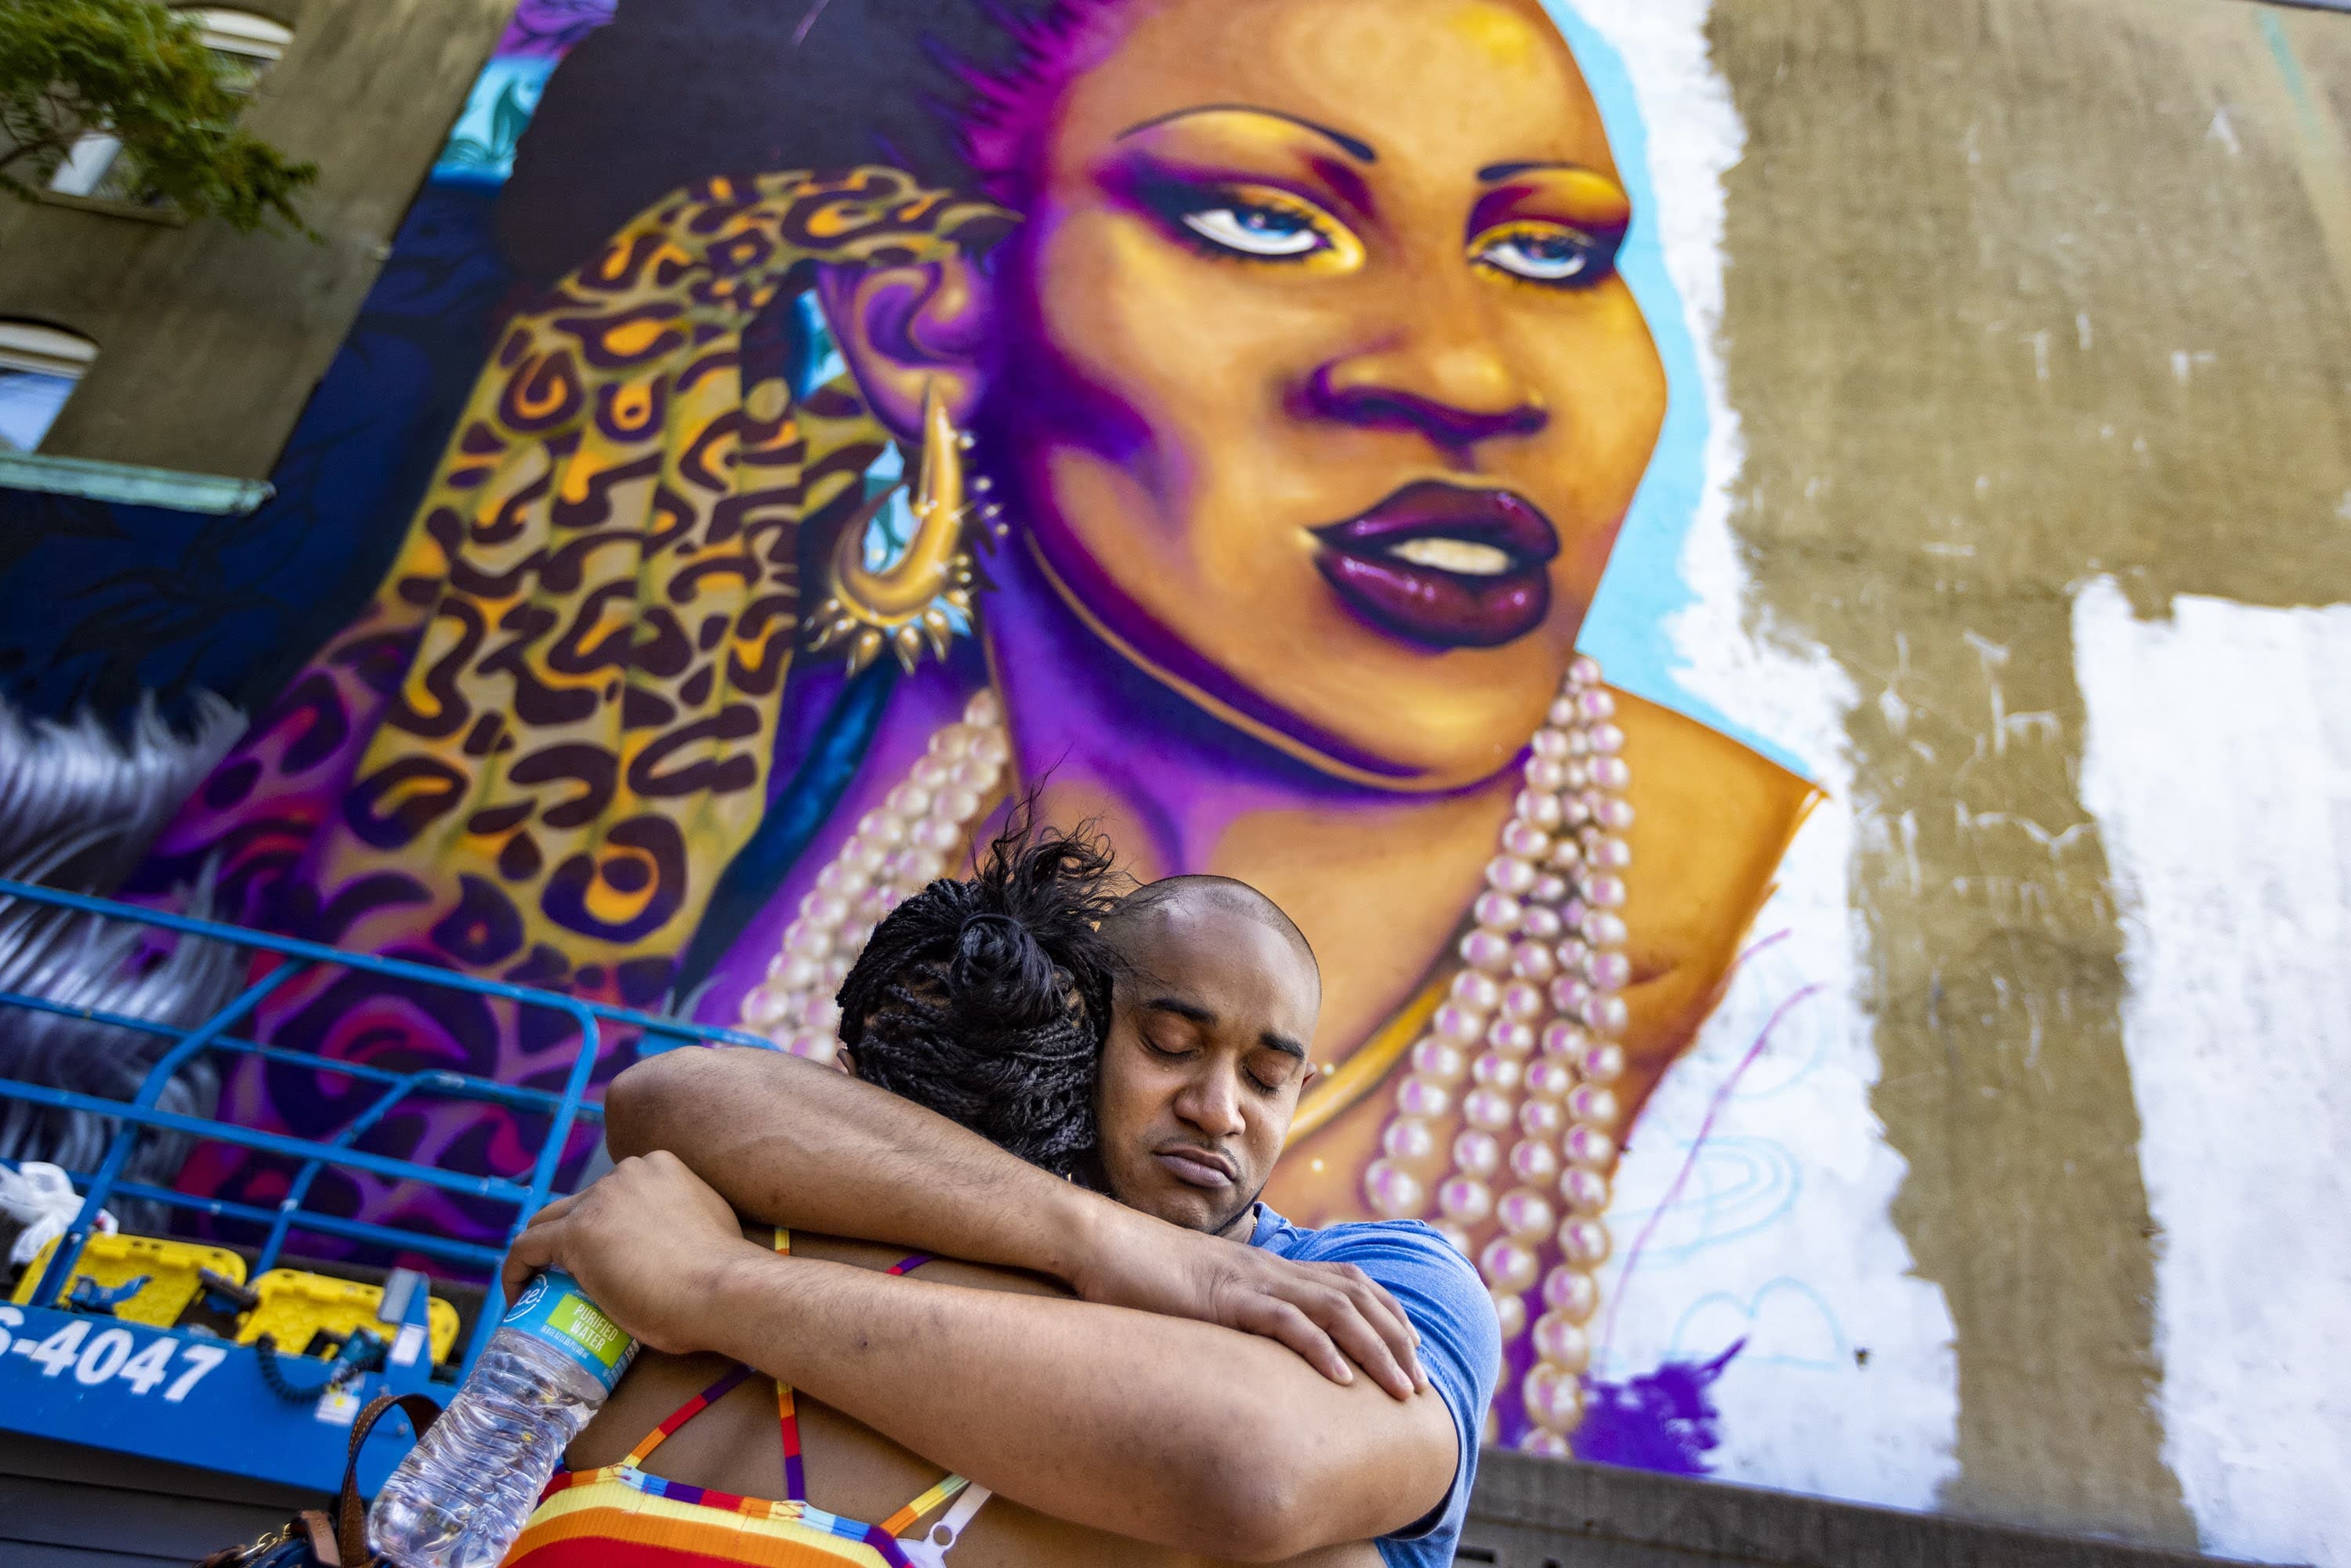 Nephew Taufiq Chowdhury and sister Kim Hester embrace after seeing the almost completed mural of Rita Hester, &quot;Rita's Spotlight,&quot; for the first time by artist Rixy in Allston. (Jesse Costa/WBUR)